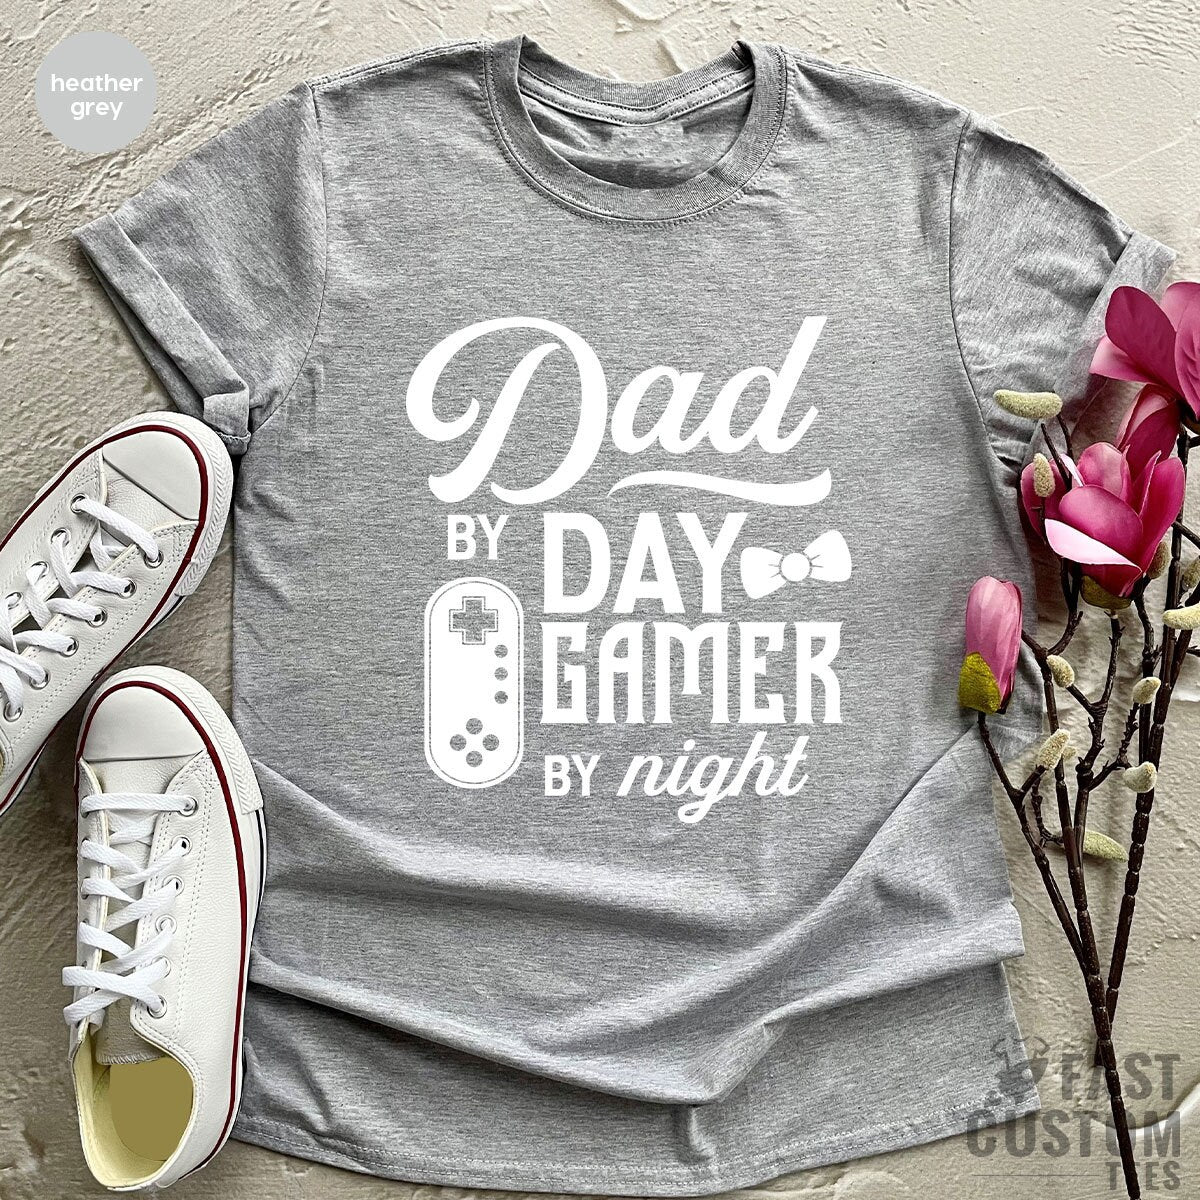 Gaming Dad Shirt, Gamer Dad TShirt, Fathers Day Gift, Father Day Shirt, Best Dad Shirt, Gaming Father Tee, Gift For Dad, Funny Dad Shirt - Fastdeliverytees.com